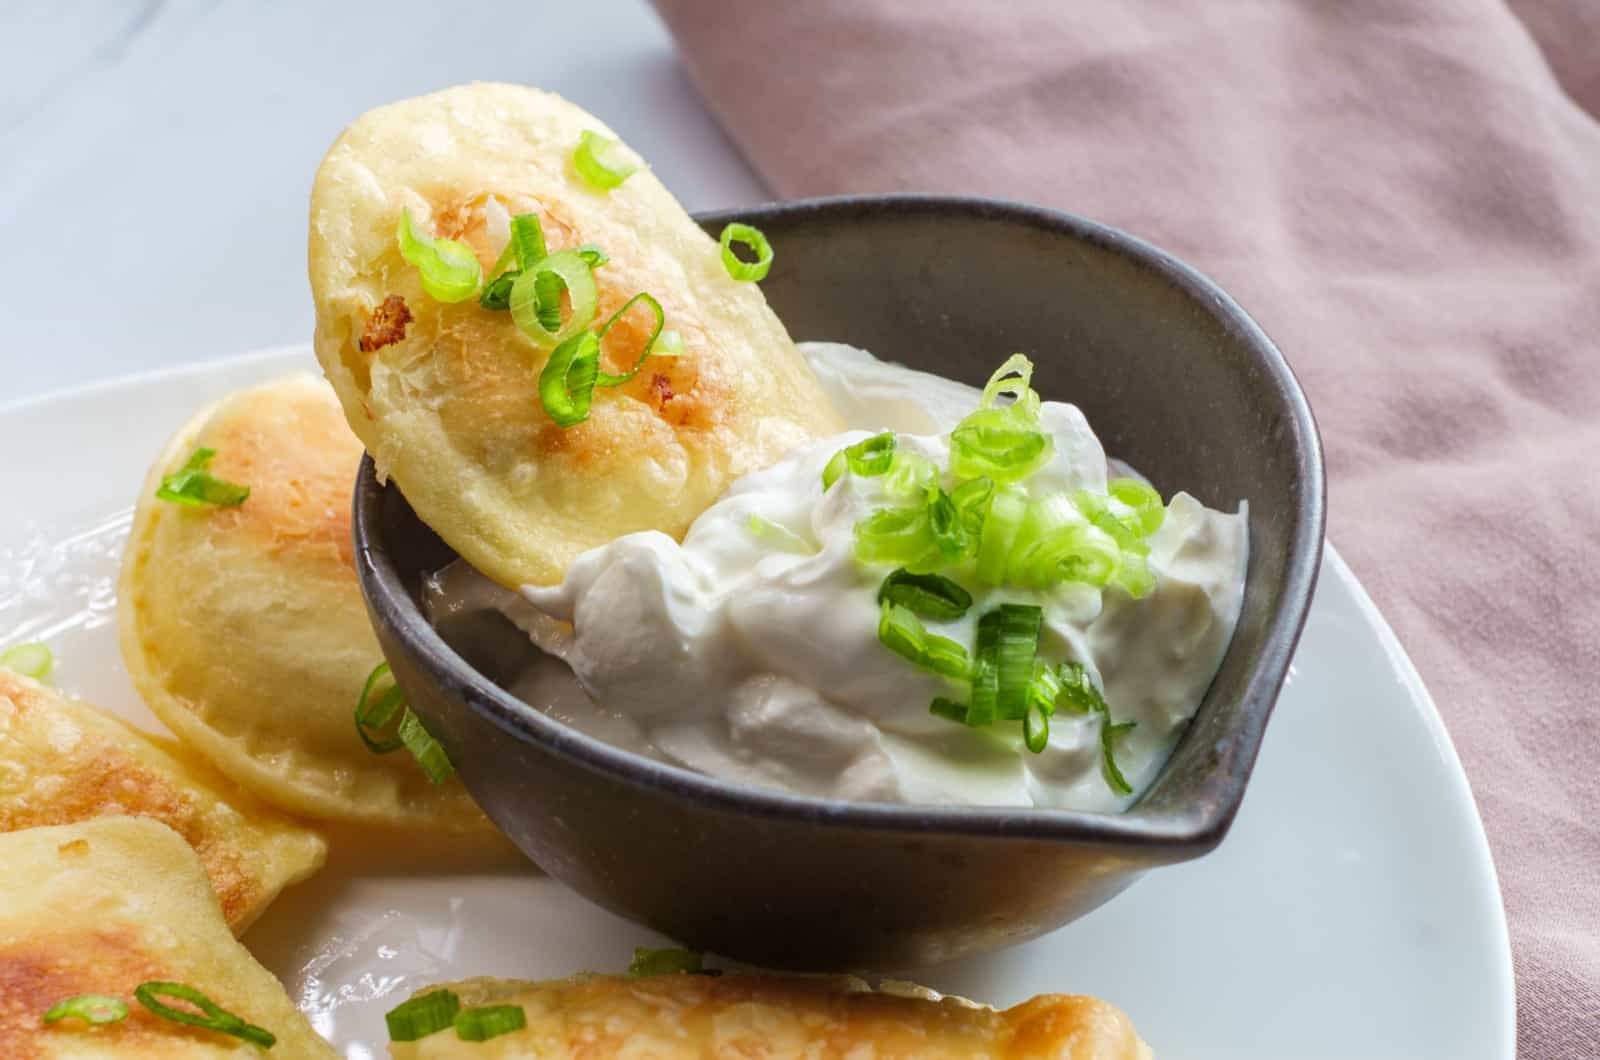 Polish pierogies with chopped green onion and sour cream